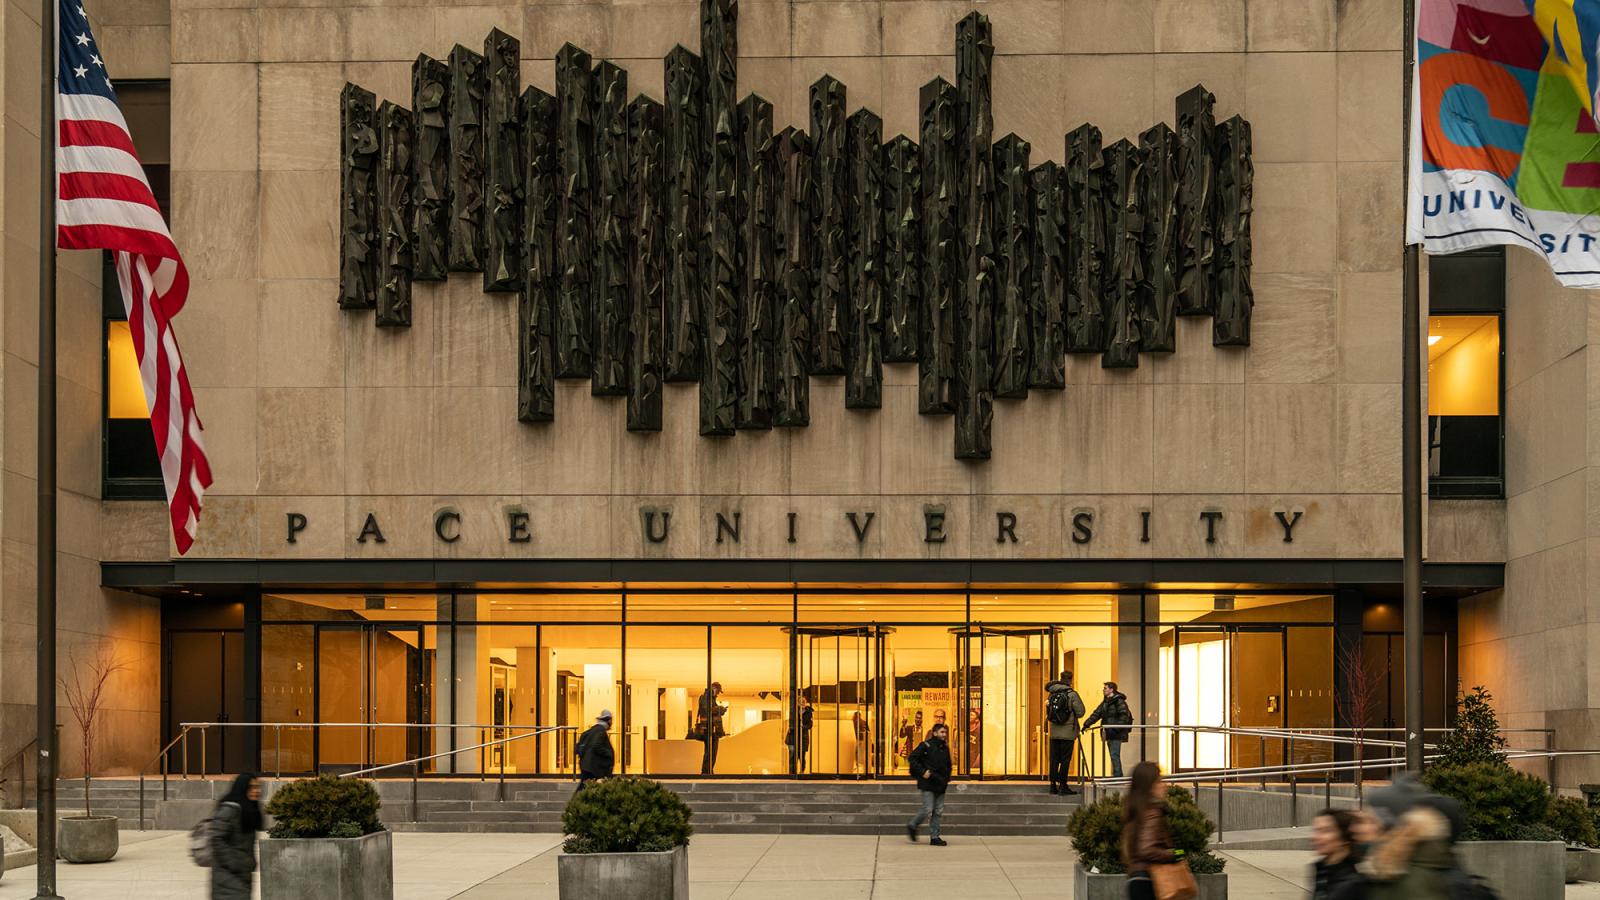 Entrance to One Pace Plaza on the NYC Pace University campus